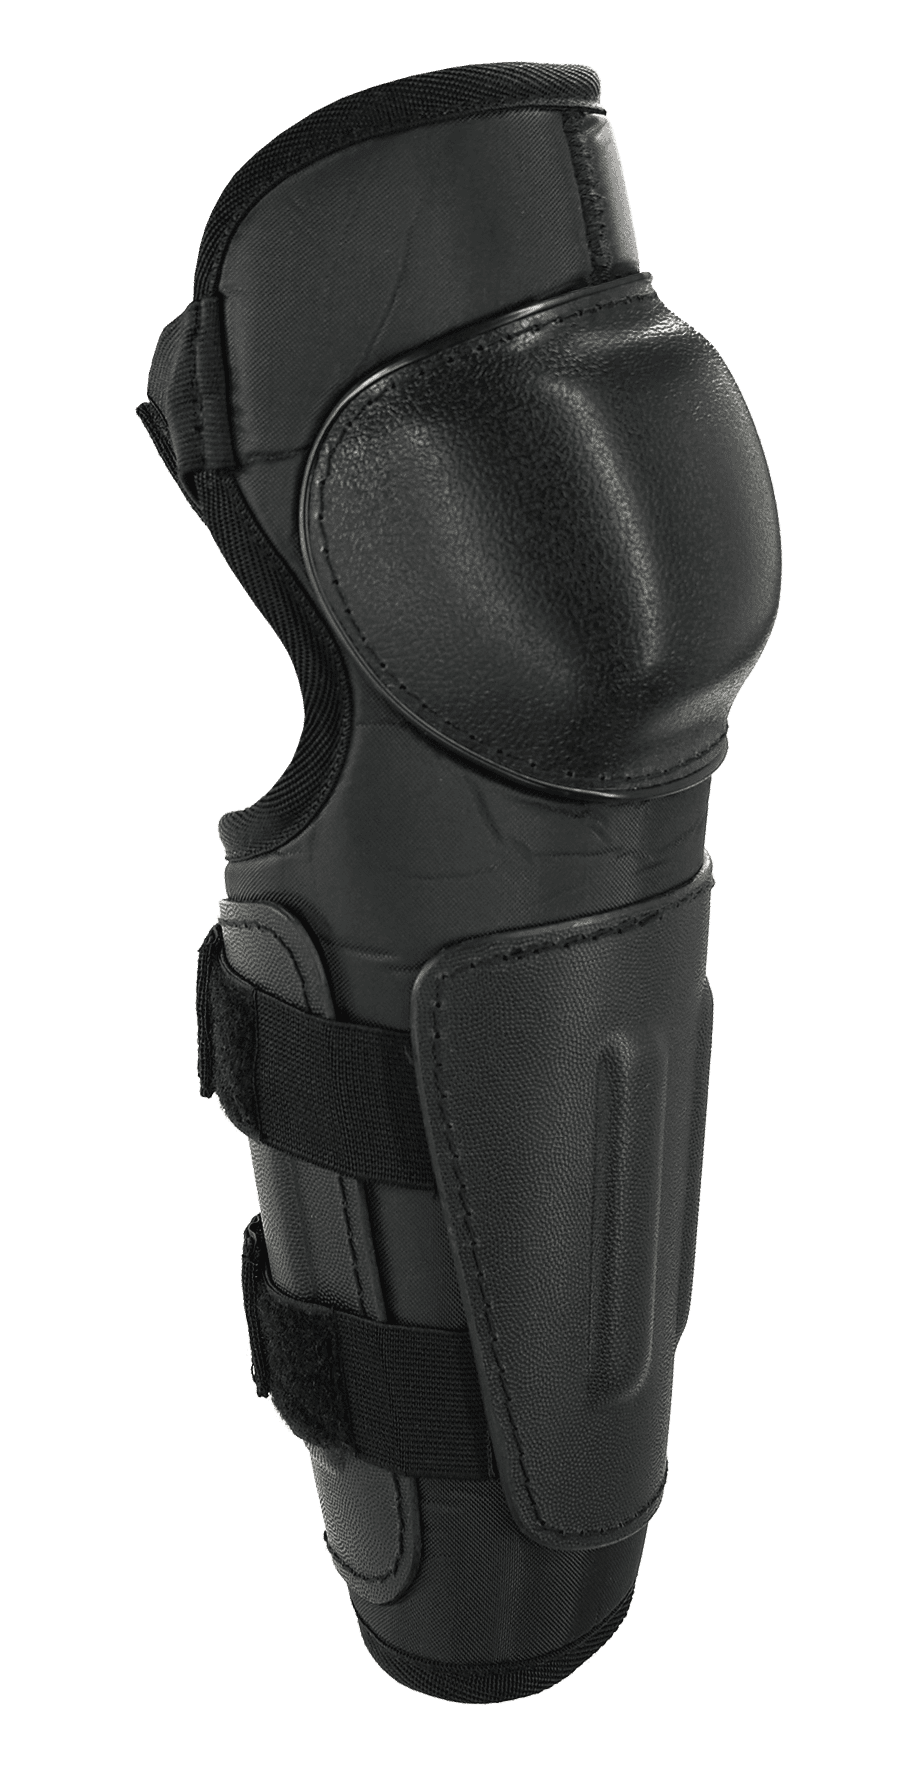 Imperial FX1 Style Forearm/Elbow Protectors